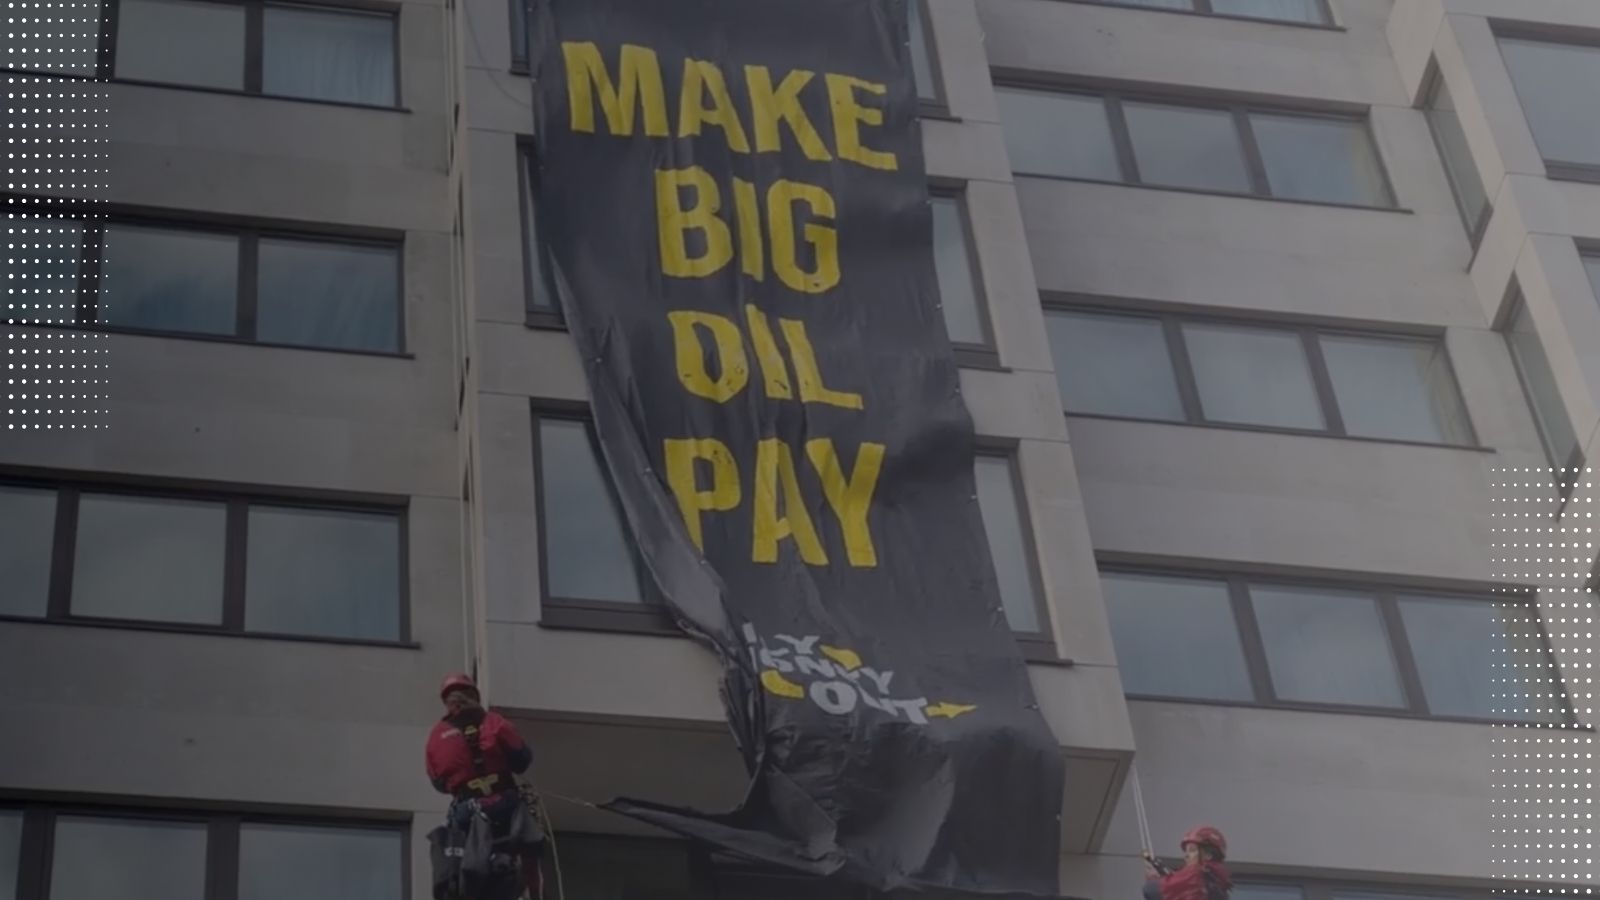 Greenpeace protesters scale InterContinental Mayfair to protest against Big Oil